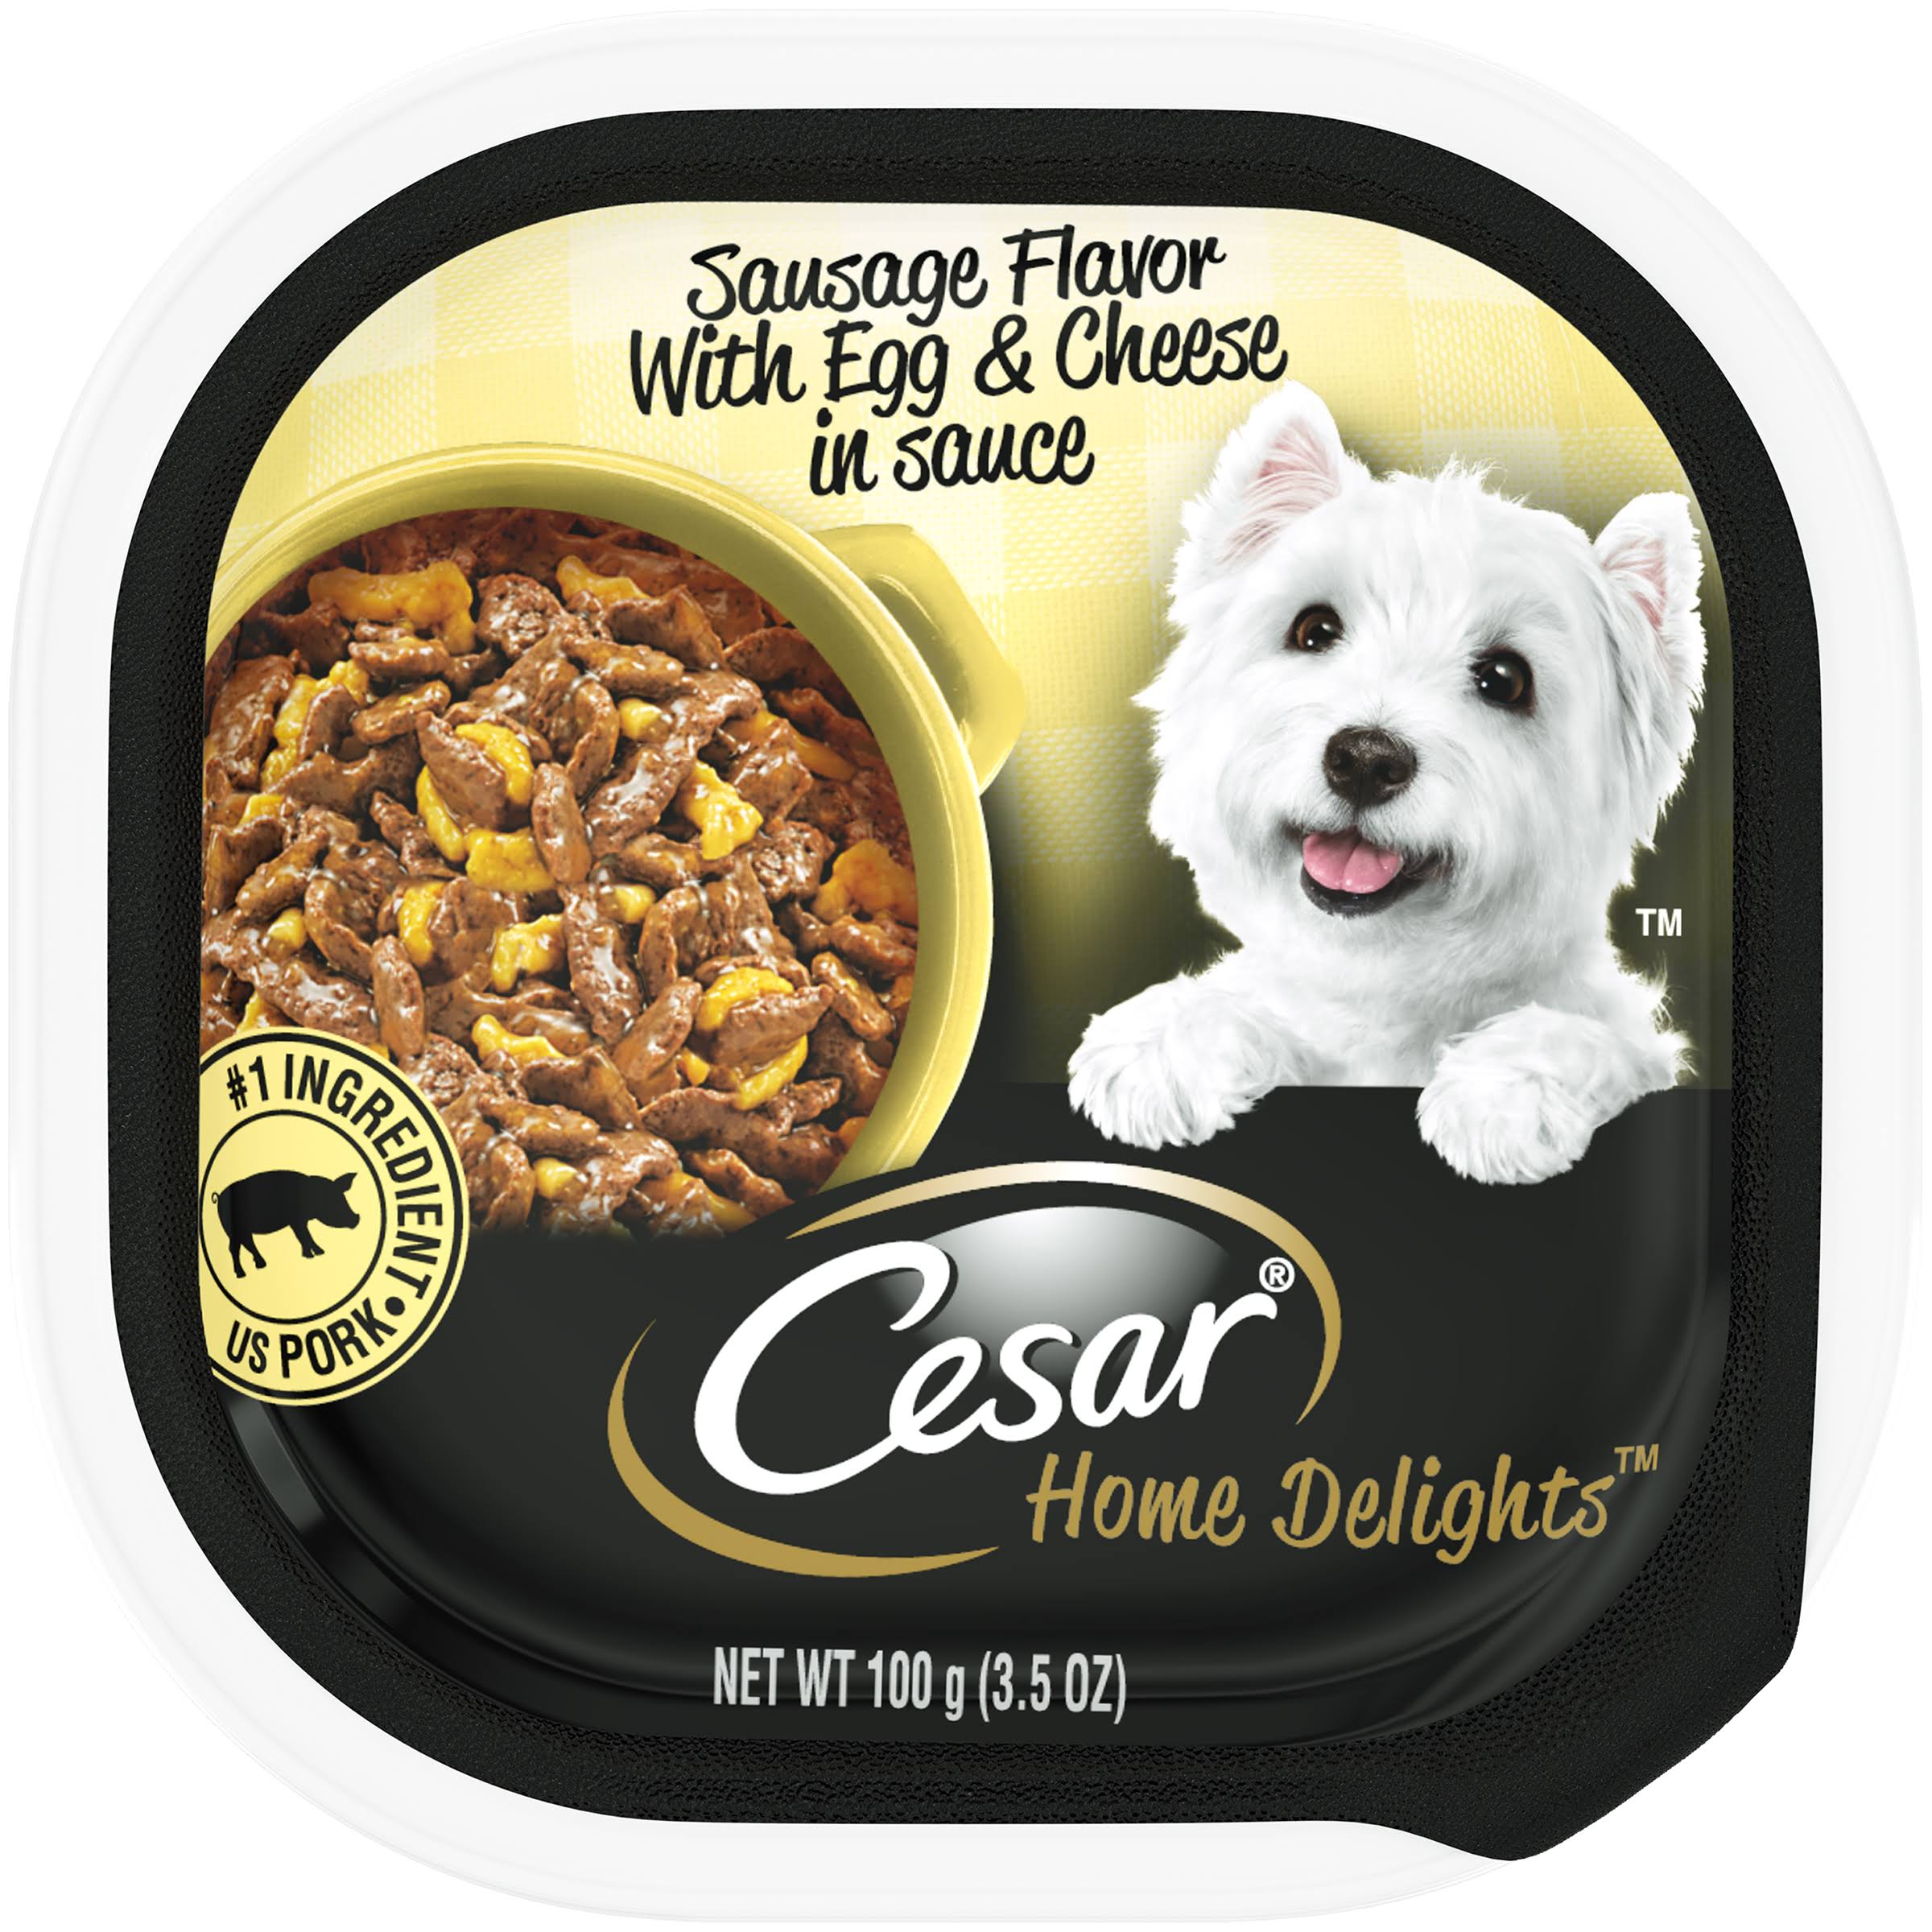 Cesar Home Delights Sausage Flavor with Egg and Cheese Wet Dog Food T